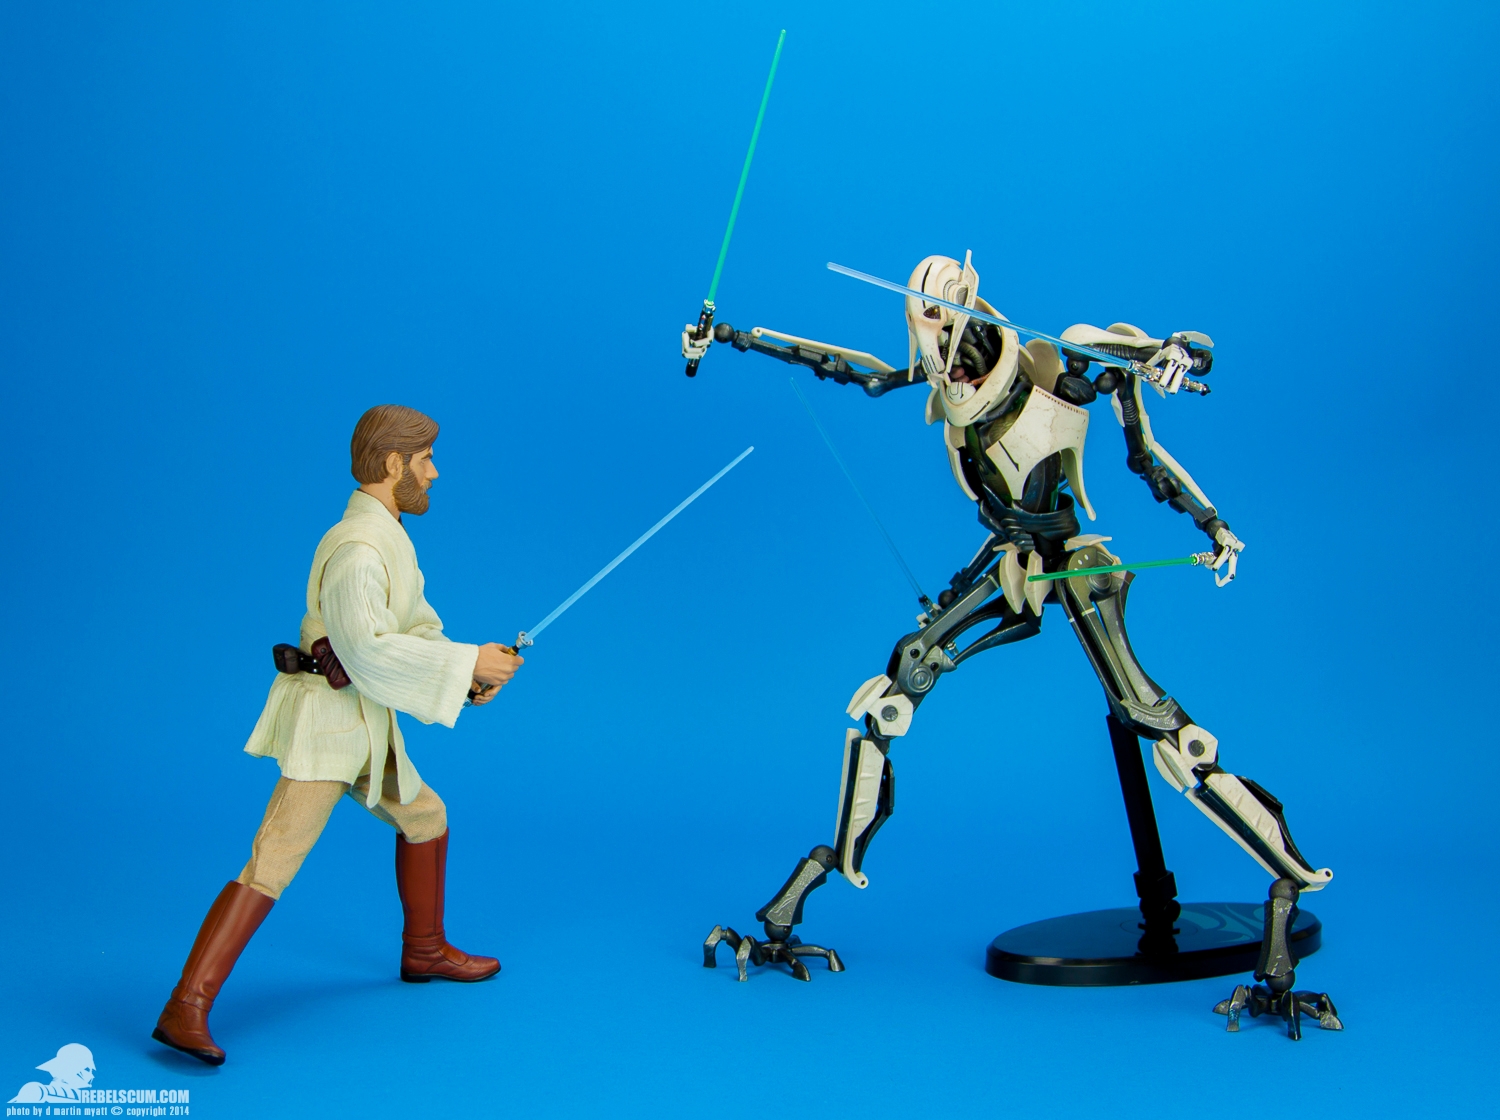 General-Grievous-Sixth-Scale-Figure-Sideshow-Collectibles-034.jpg